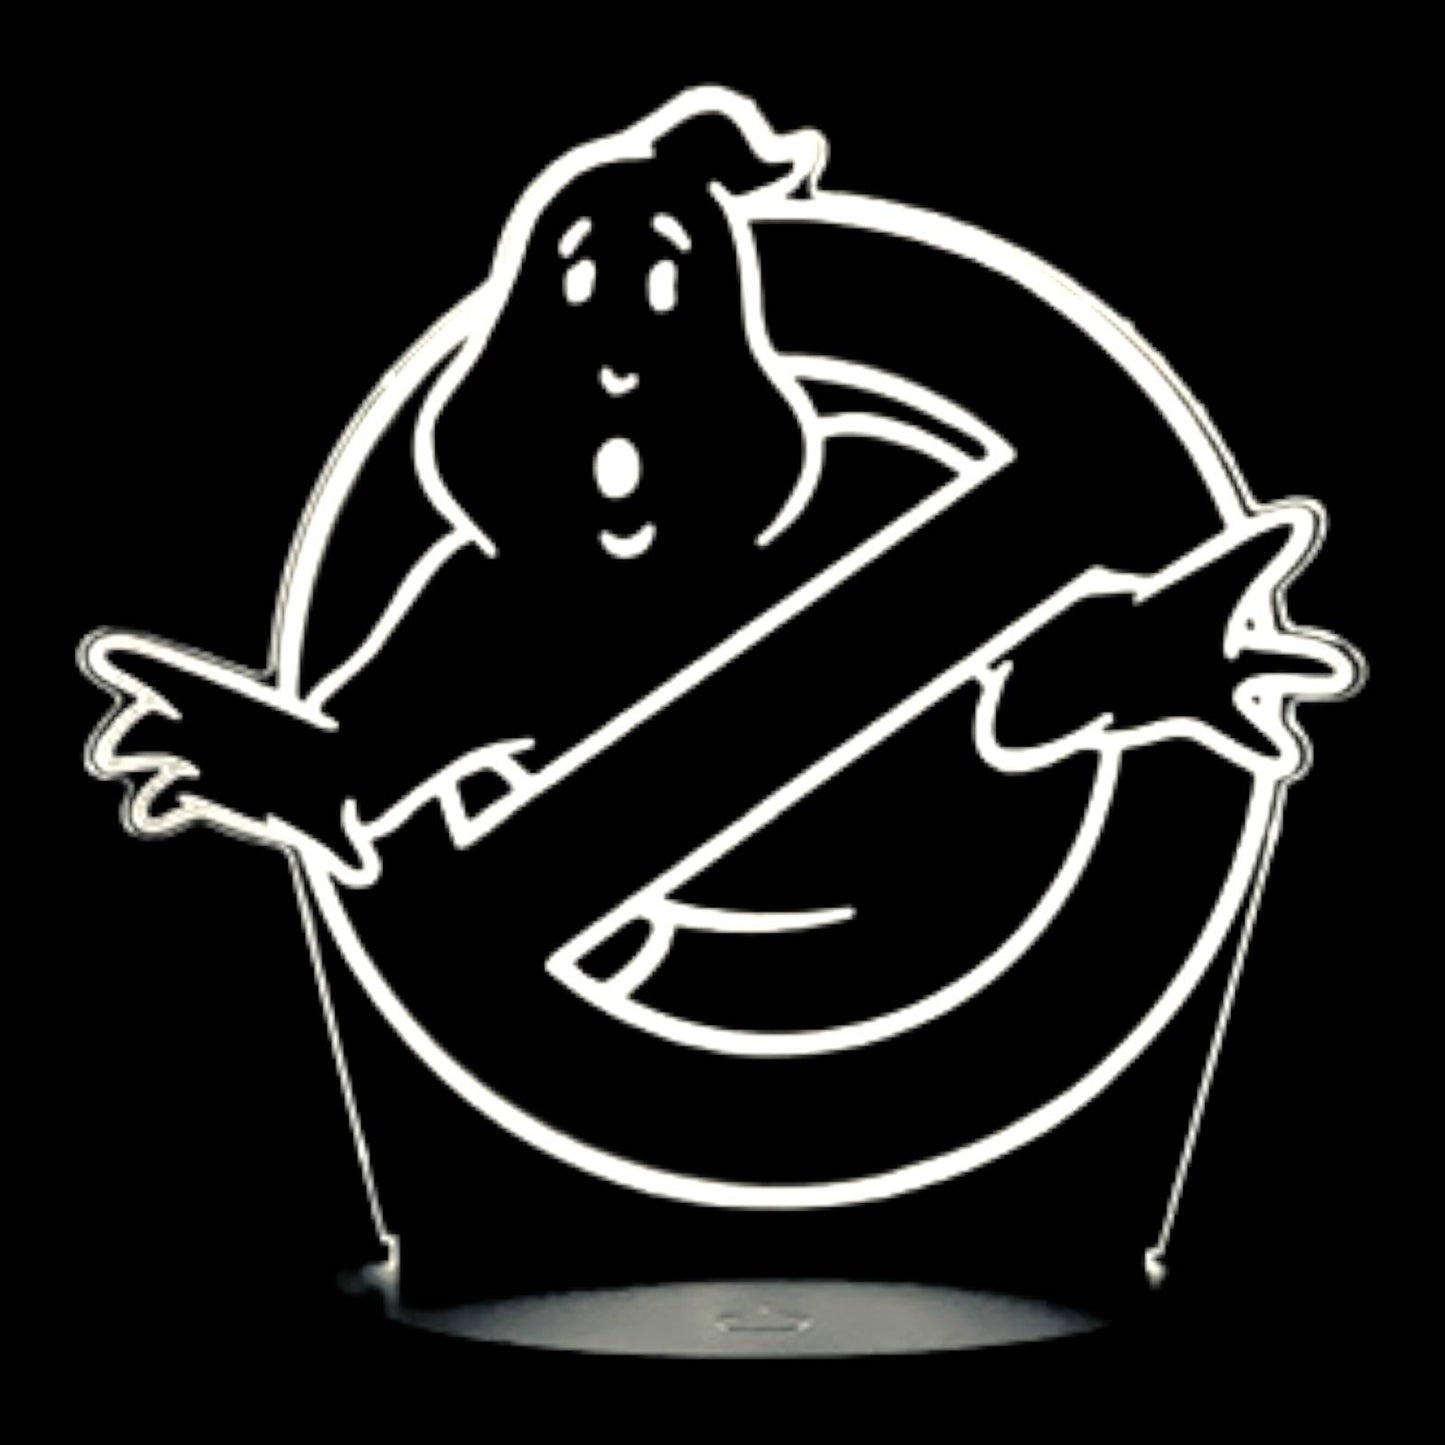 Ghostbusters 3D LED Night-Light 7 Color Changing Lamp w/ Touch Switch